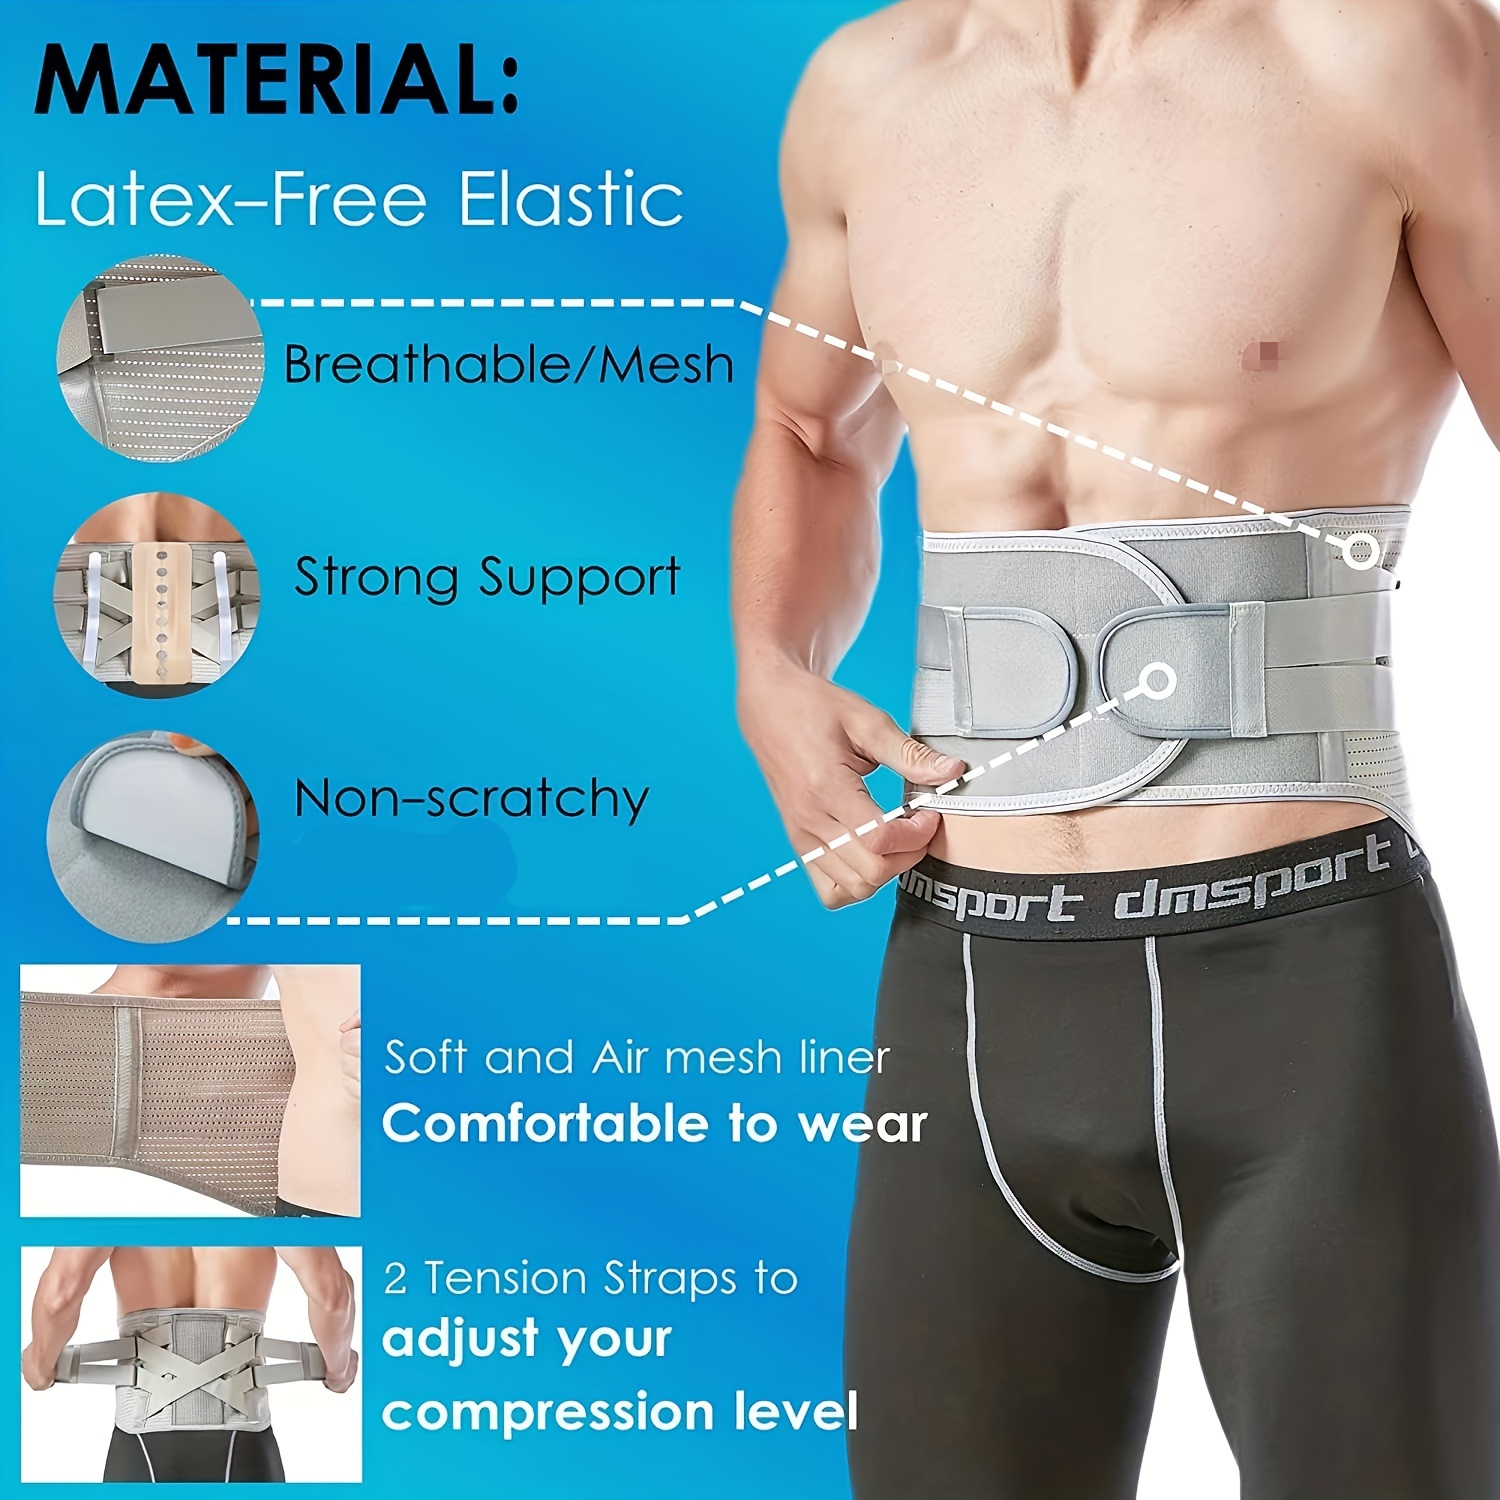 Back Braces for Lower Back Pain Relief with 6 Stays, Breathable Back  Support Belt for Men/Women for work , Anti-skid lumbar support belt with  16-hole Mesh for sciatica(L) 